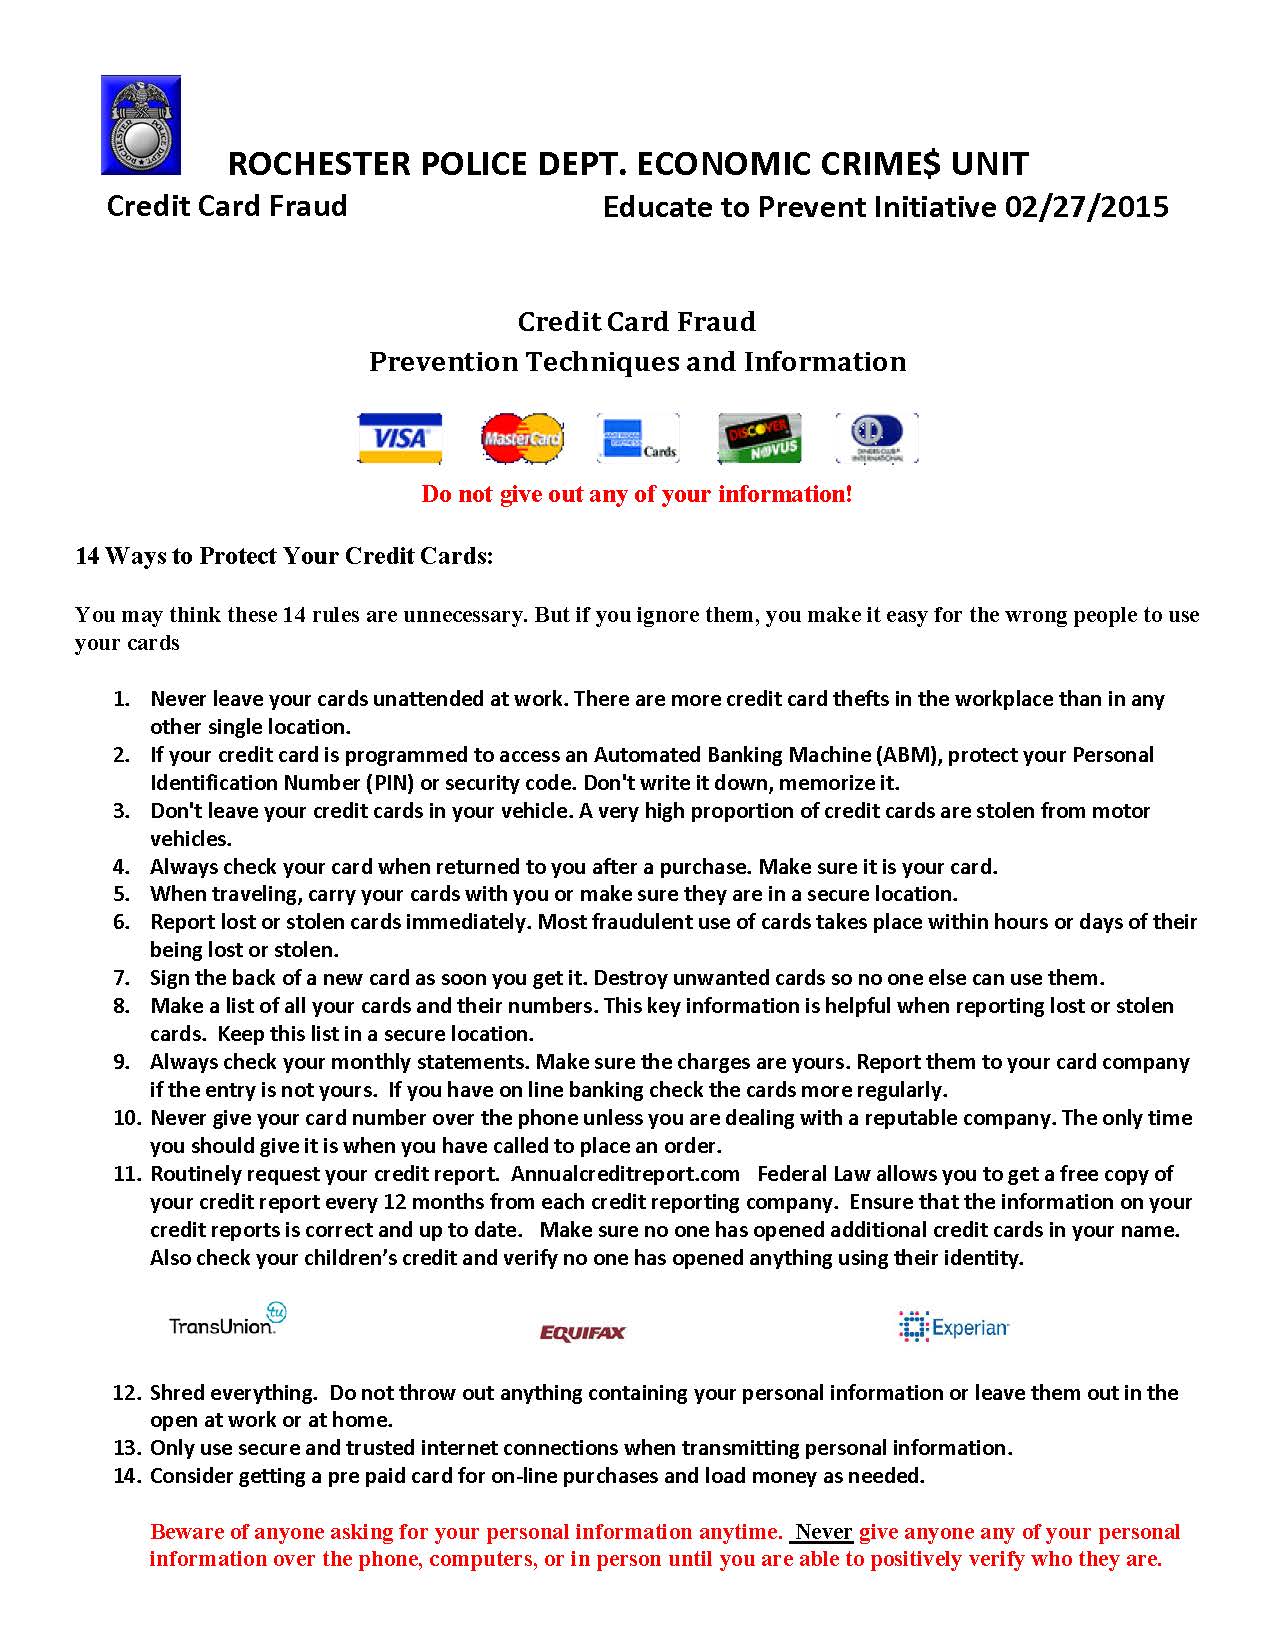 Credit Card Fraud Prevention